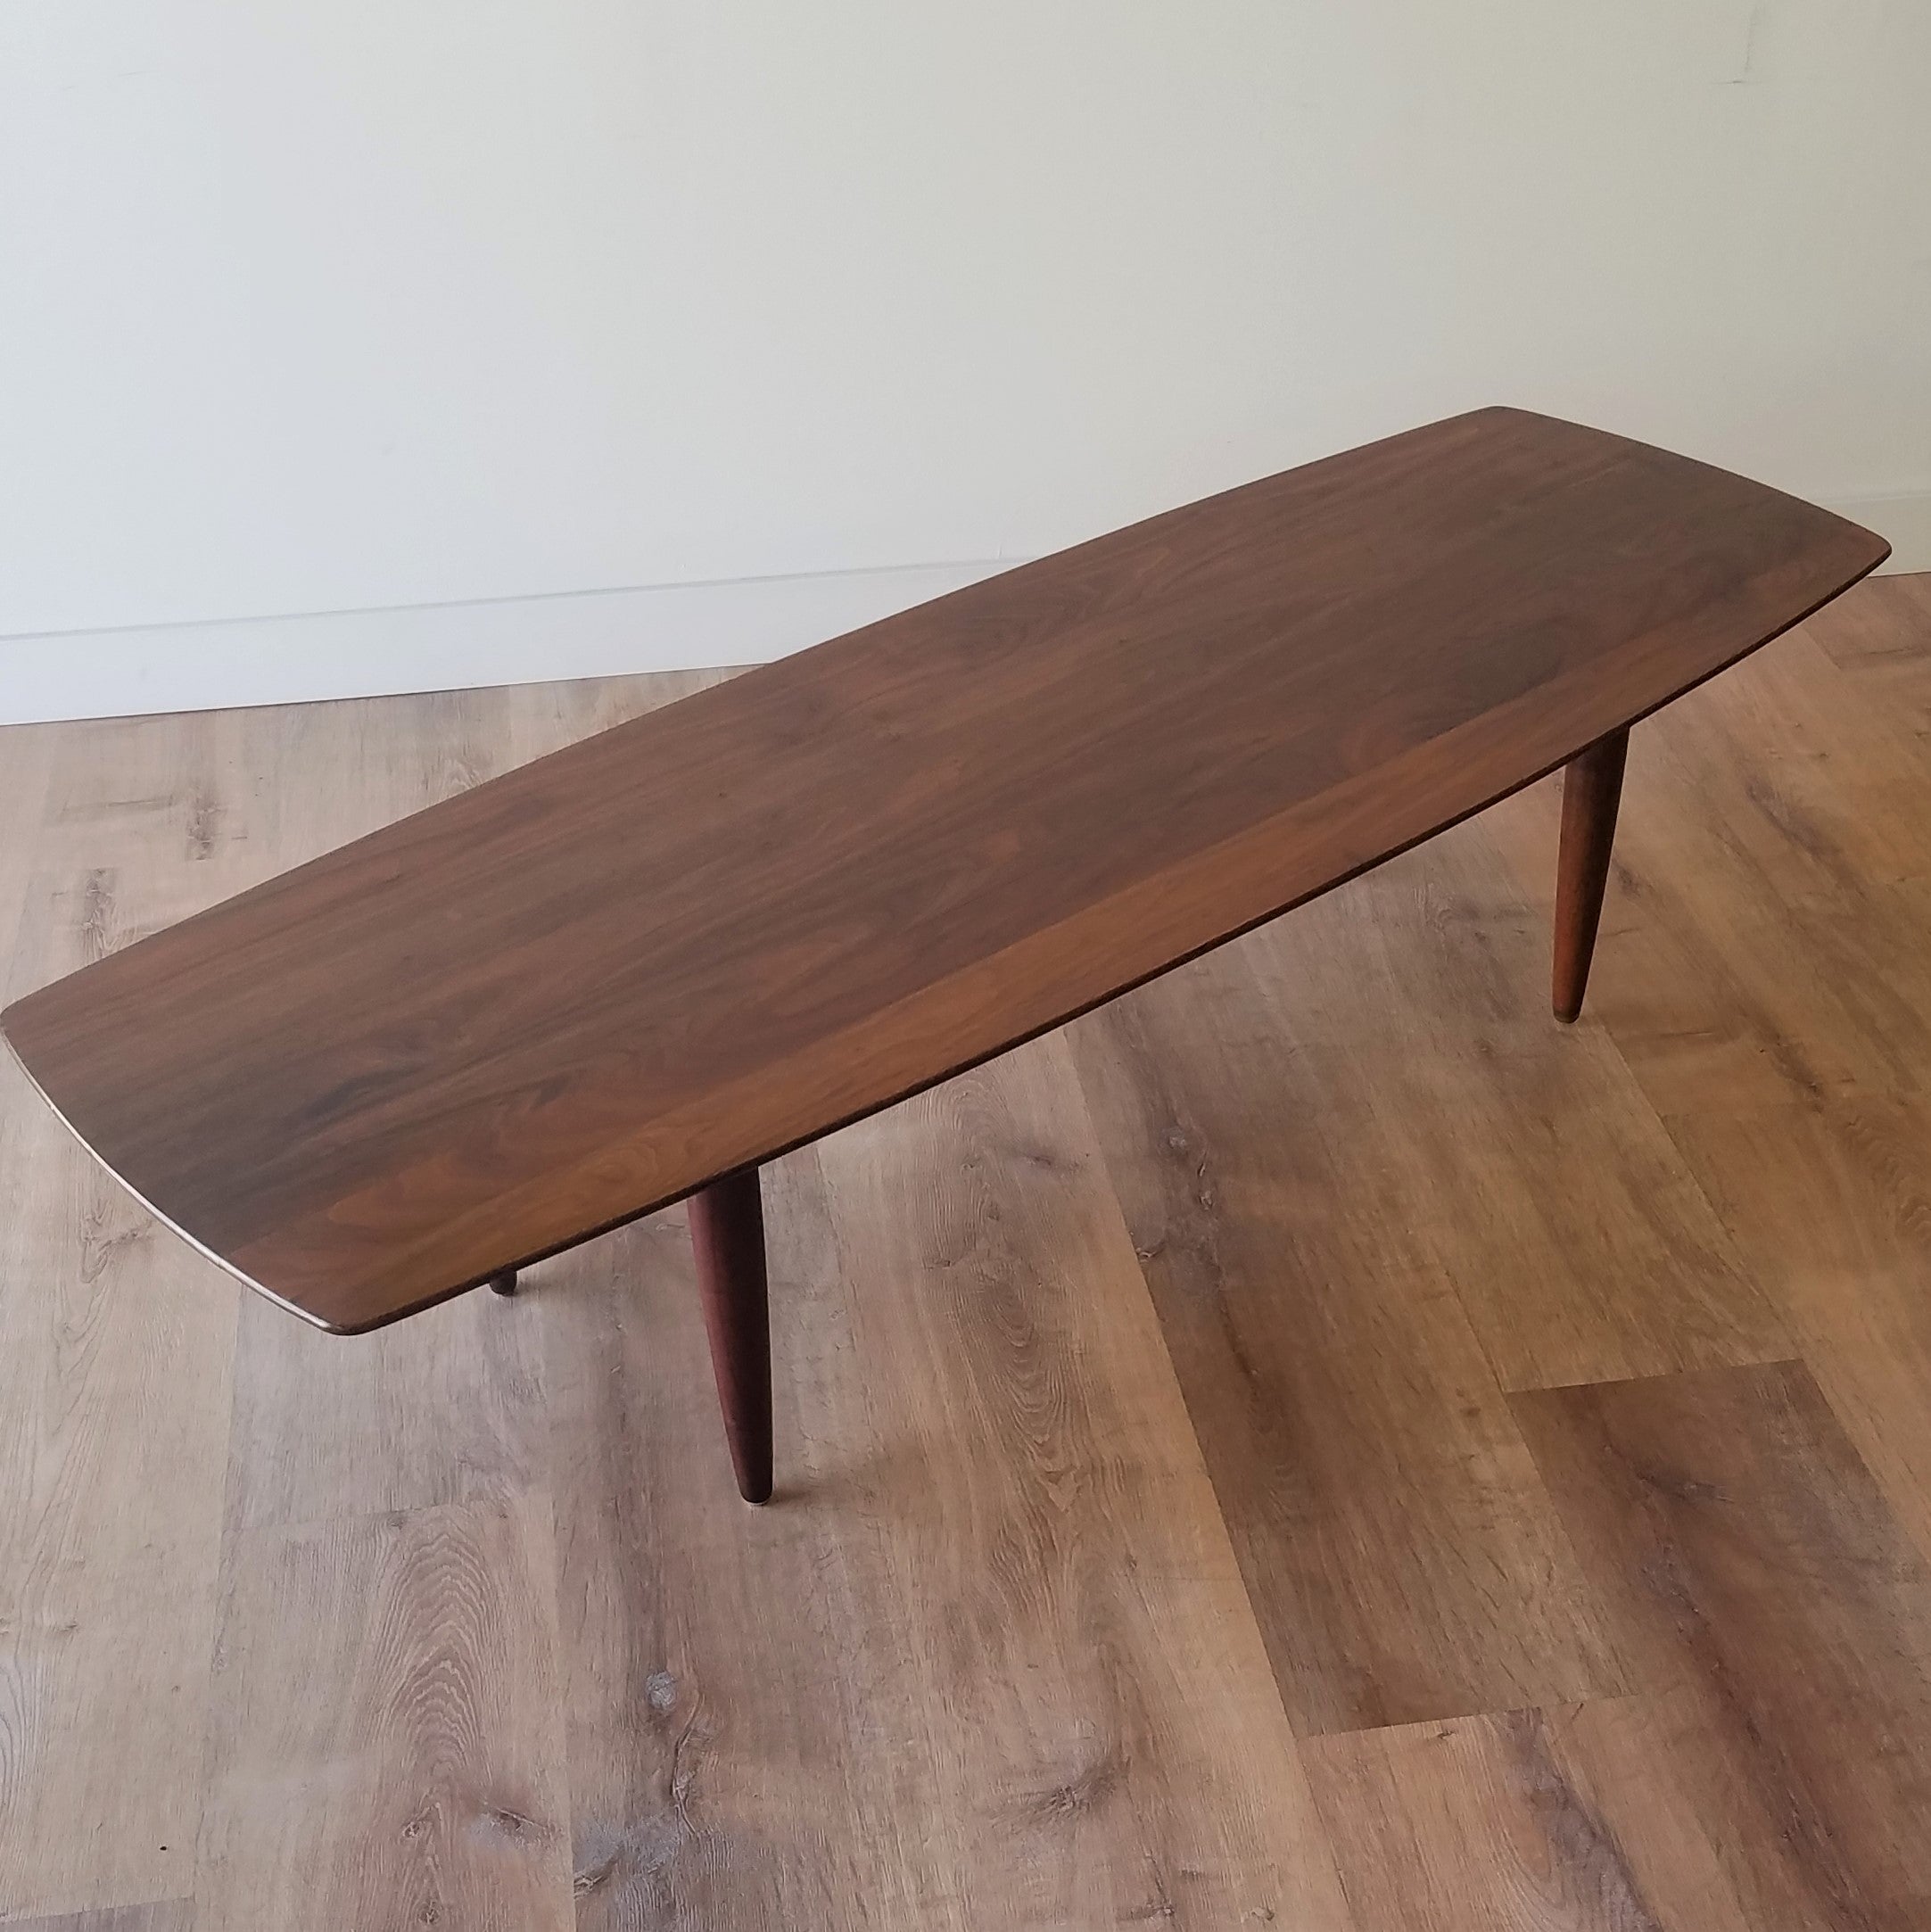 Front Quarter view of American Mid-Century Modern Prelude Walnut Surfboard Coffee Table in Seattle, Washington.